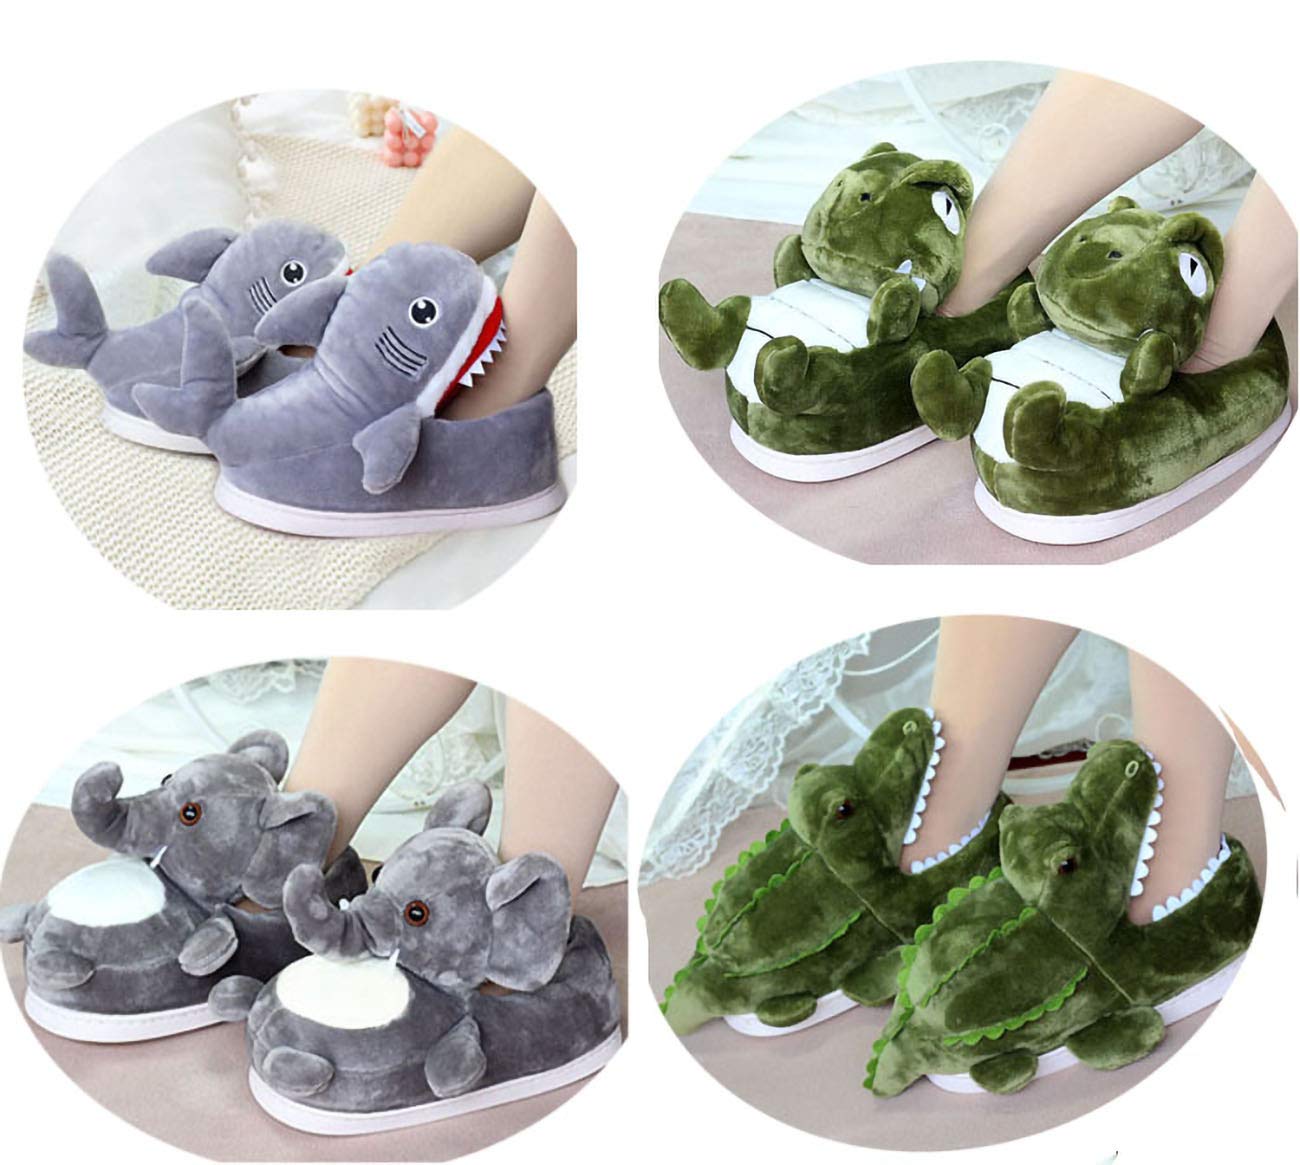 ixiton Adult unisex Winter warm plush animal slippers,Soft Cozy Animal styling design Short flannel home shoes,Animal Shaped Plush Booties,Carpet Slippers,Non-Slip Bedroom Shoes